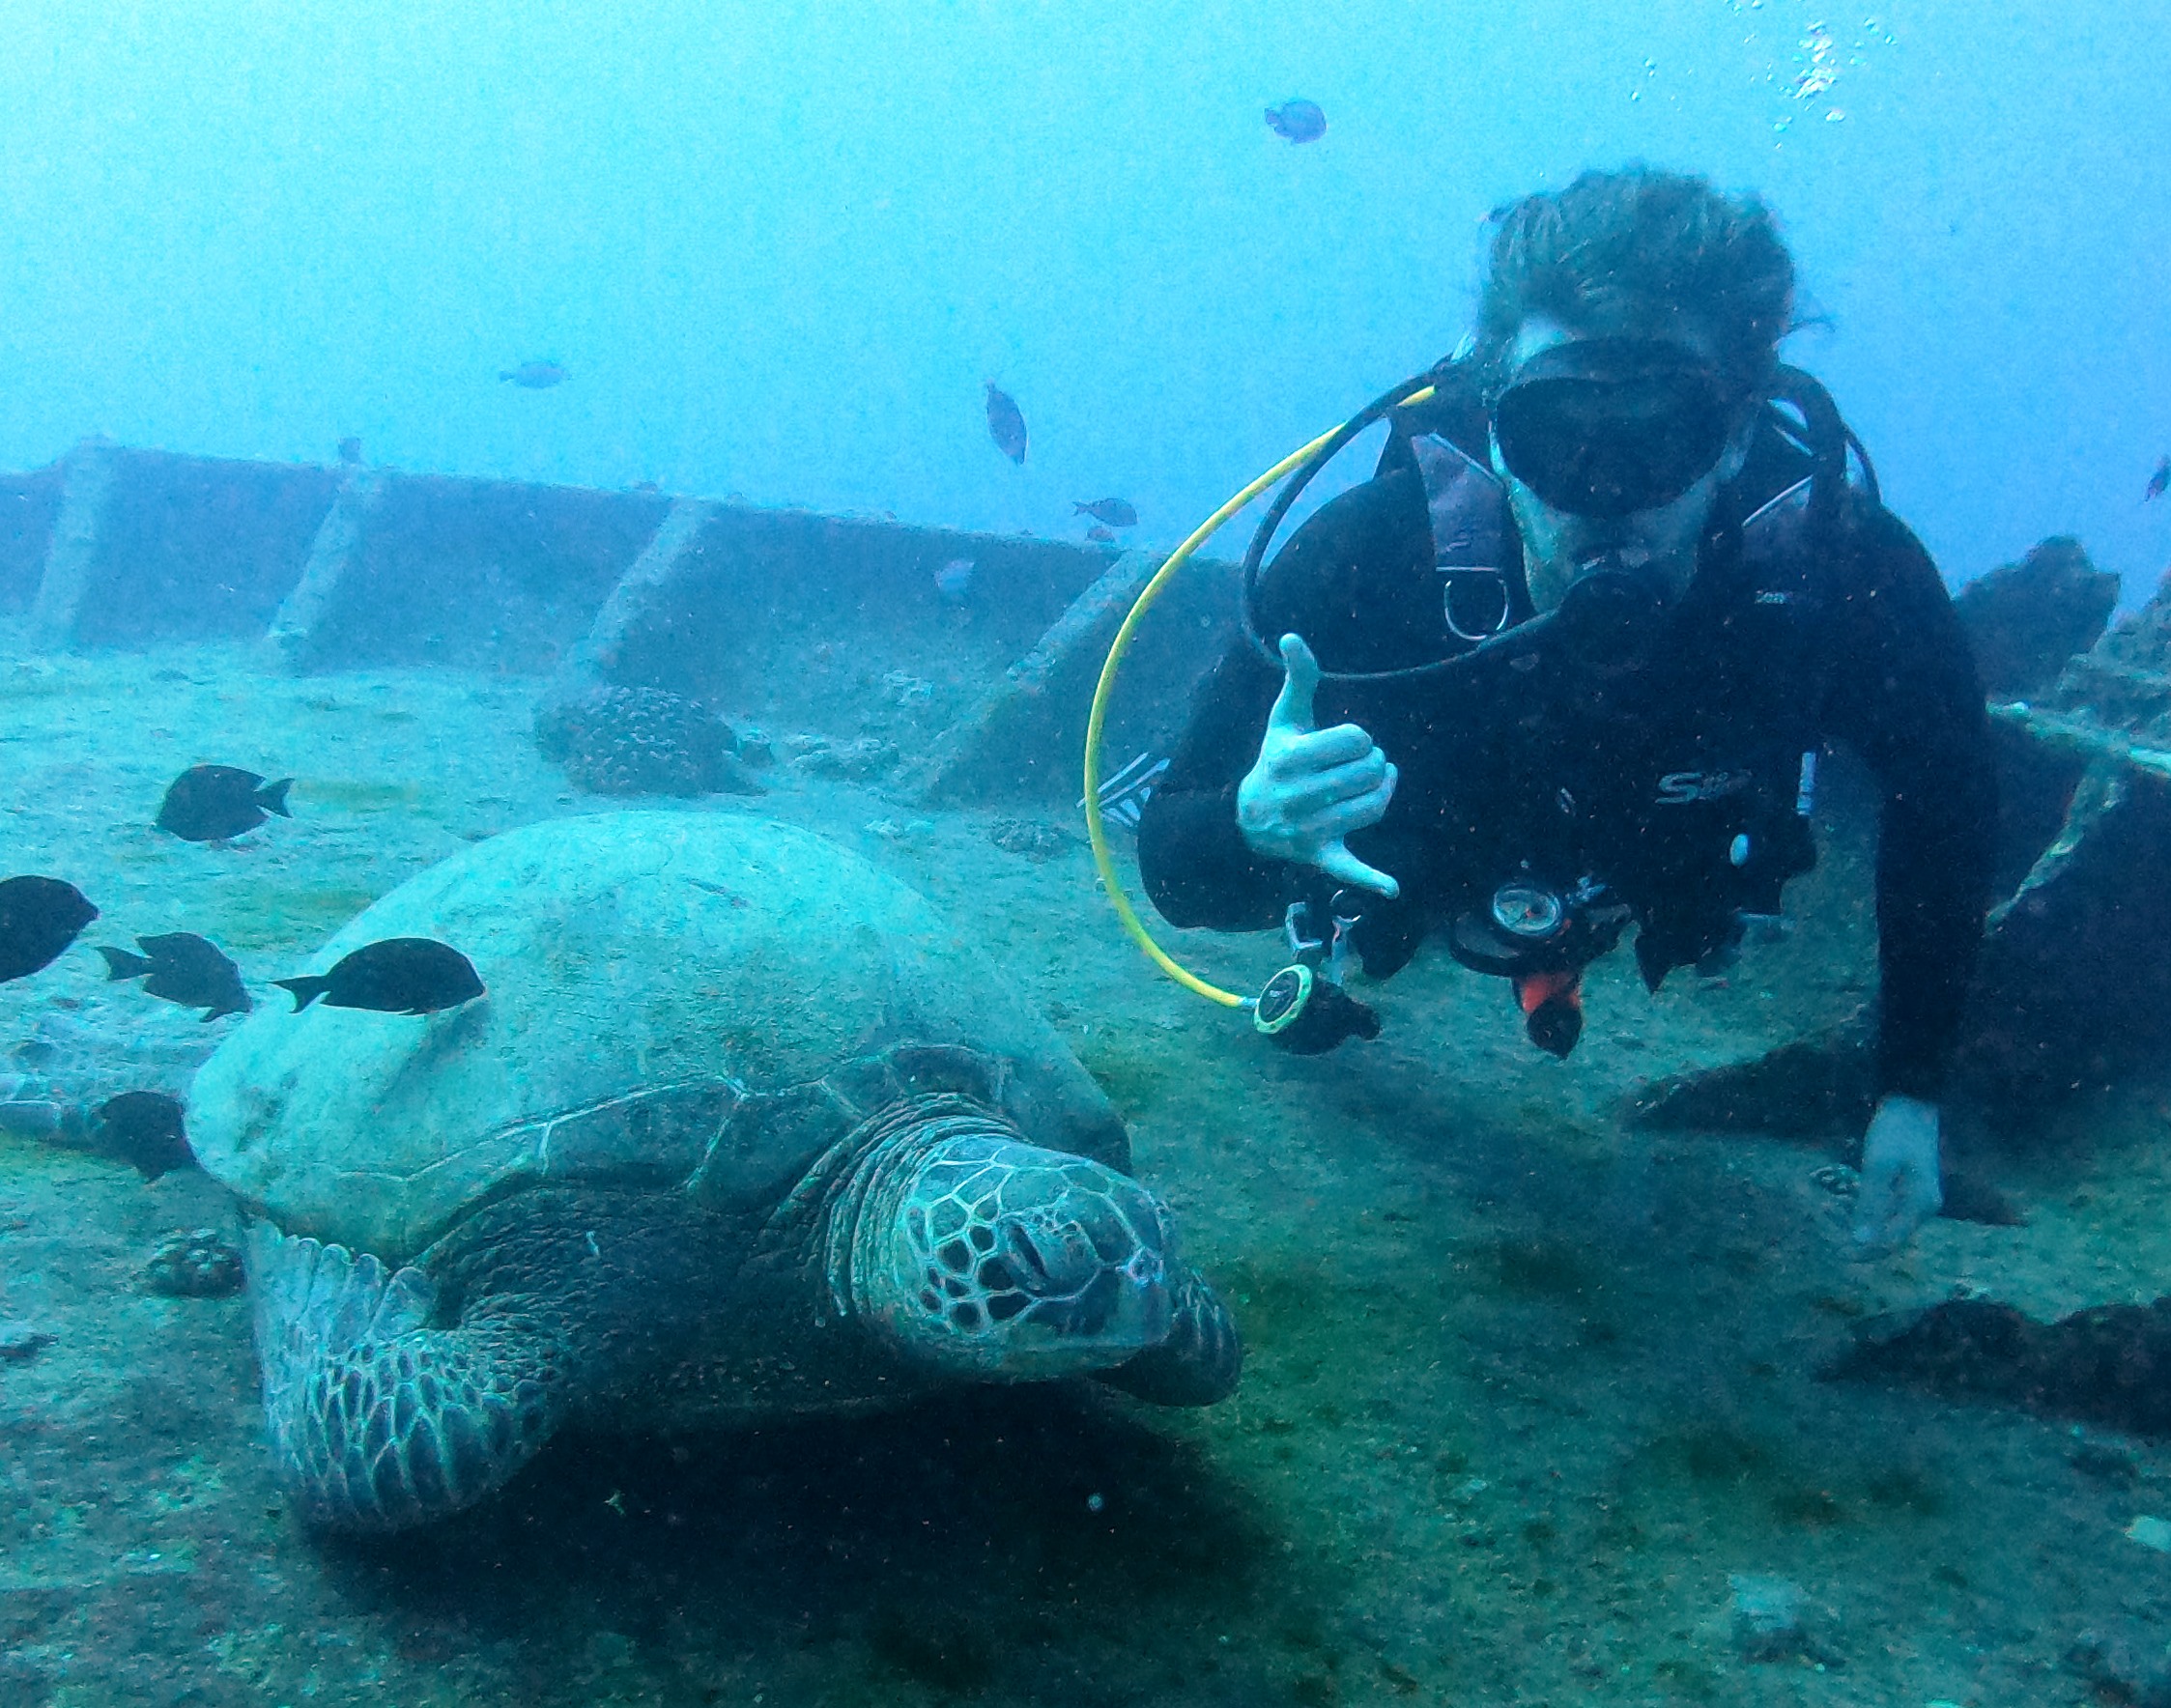 David Hoellstedt on the Sea Tiger shipwreck